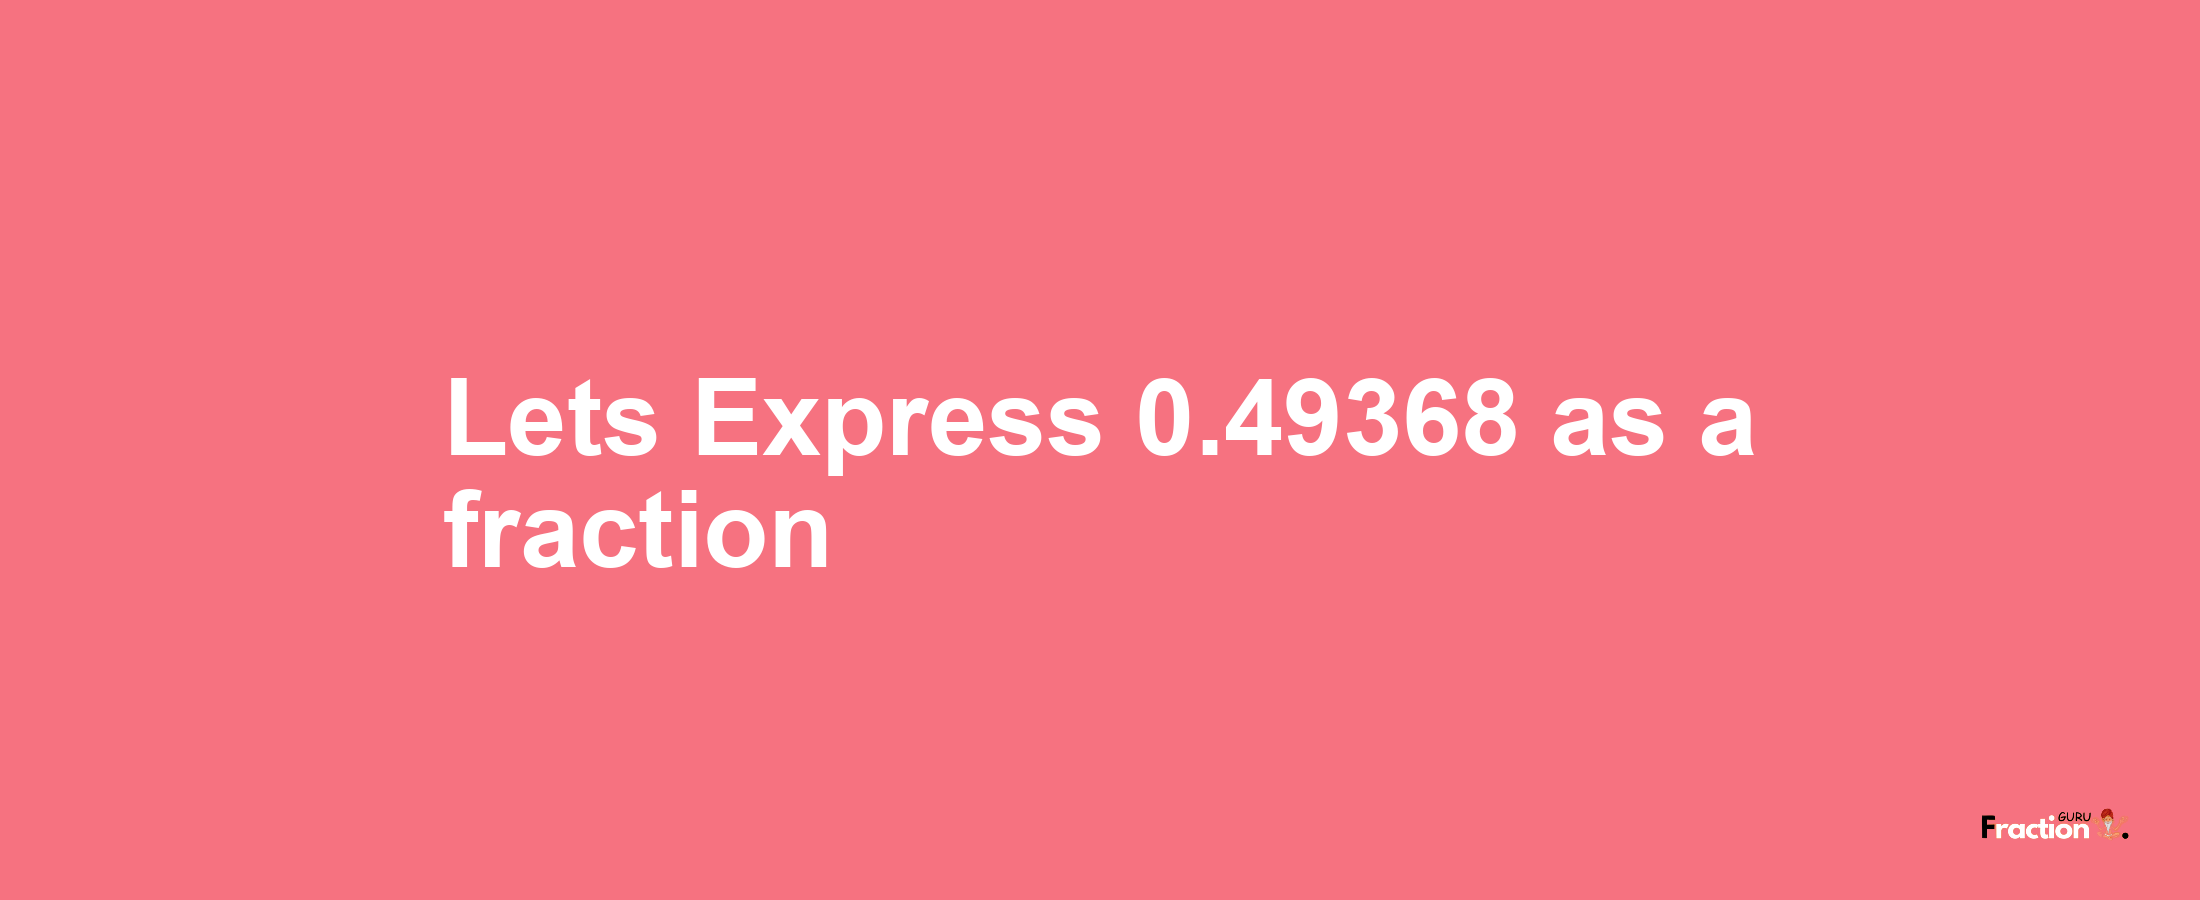 Lets Express 0.49368 as afraction